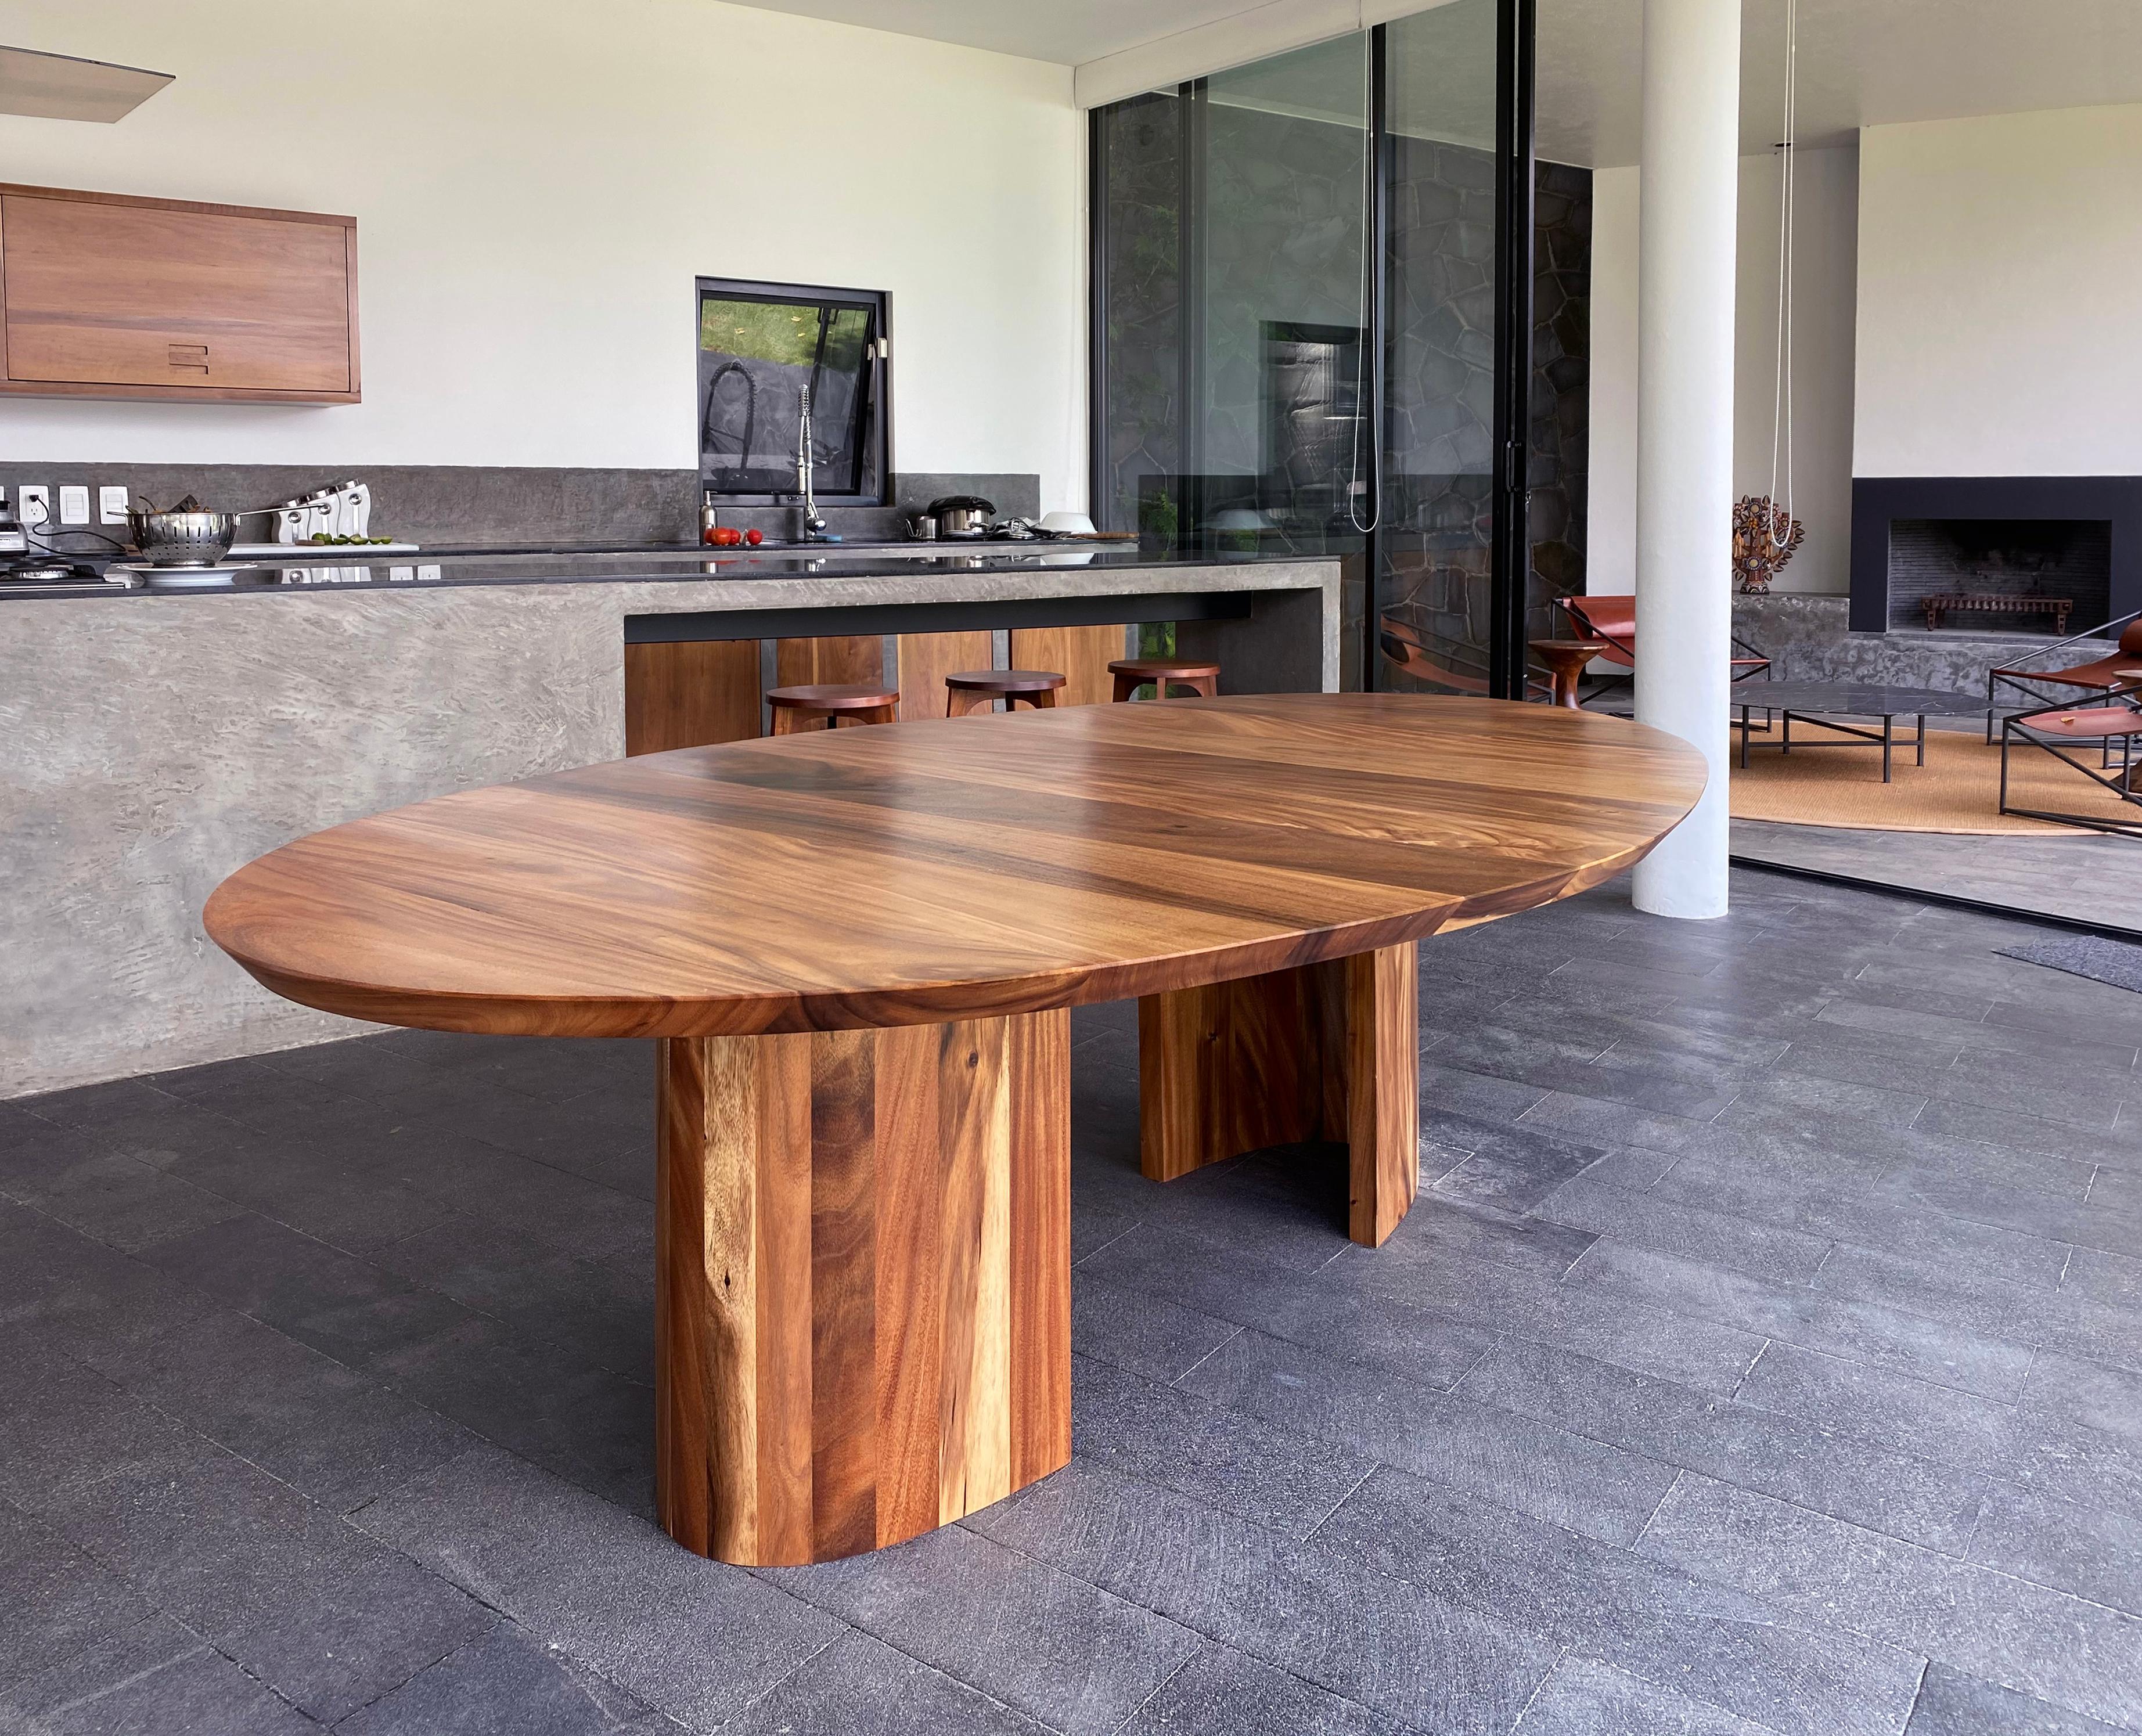 Contemporary dining table, a handcrafted design by Maria Beckmann. Pictured: Solid Tzalam wood. 
Type of wood and size is customizable.

Mesa Barlovento is available in multiple dimensions and materials:

Types of wood: Solid Spring Wood / Parota /